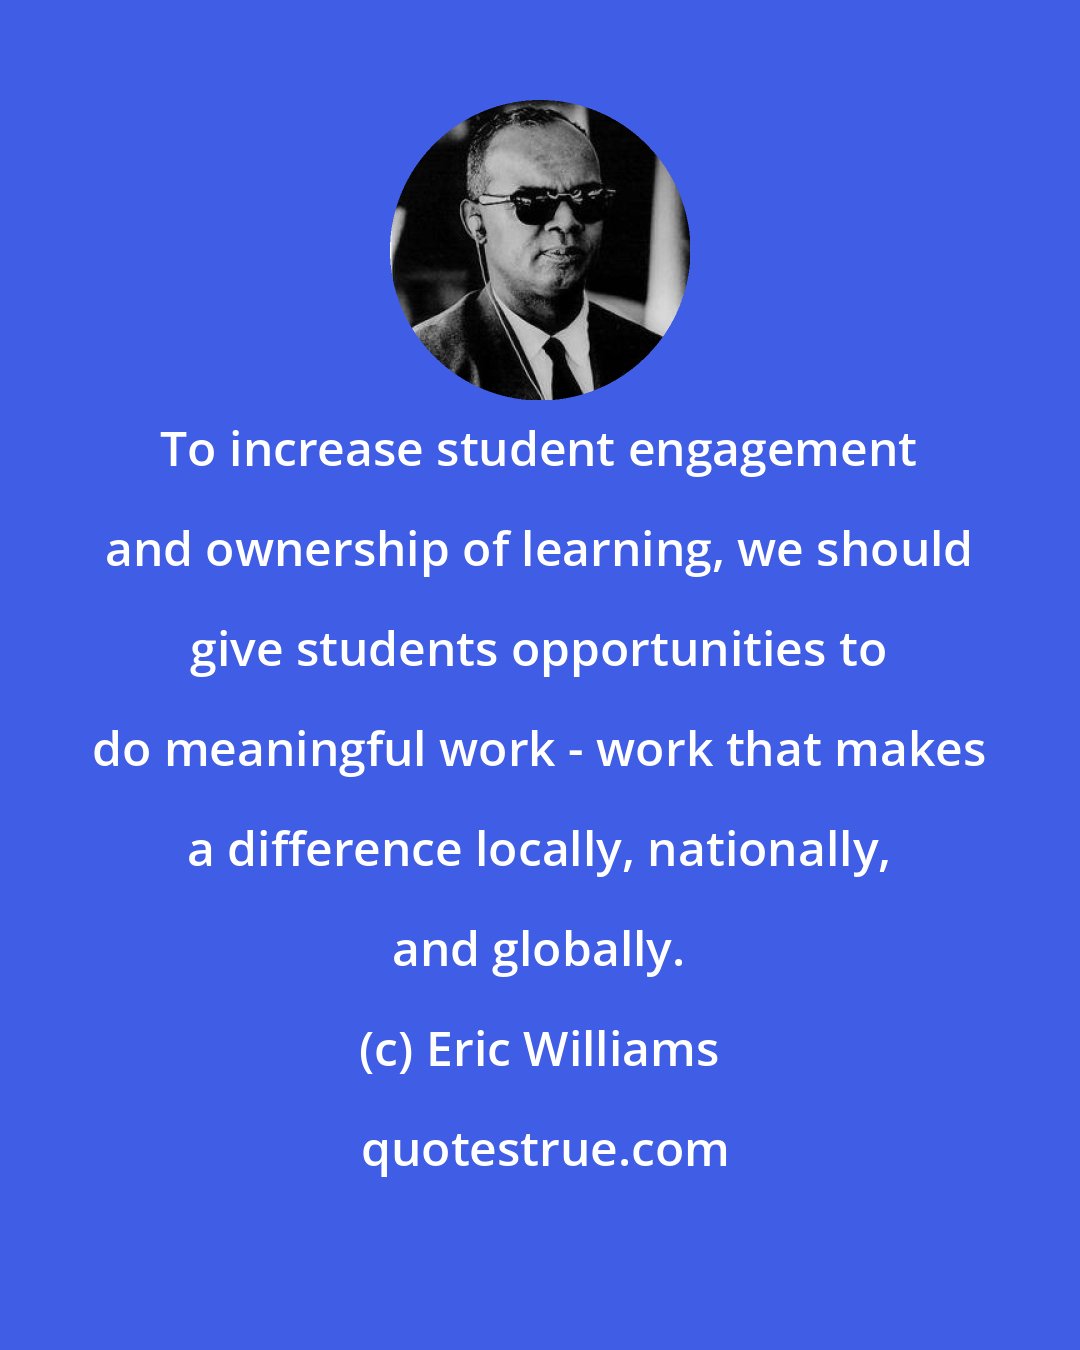 Eric Williams: To increase student engagement and ownership of learning, we should give students opportunities to do meaningful work - work that makes a difference locally, nationally, and globally.